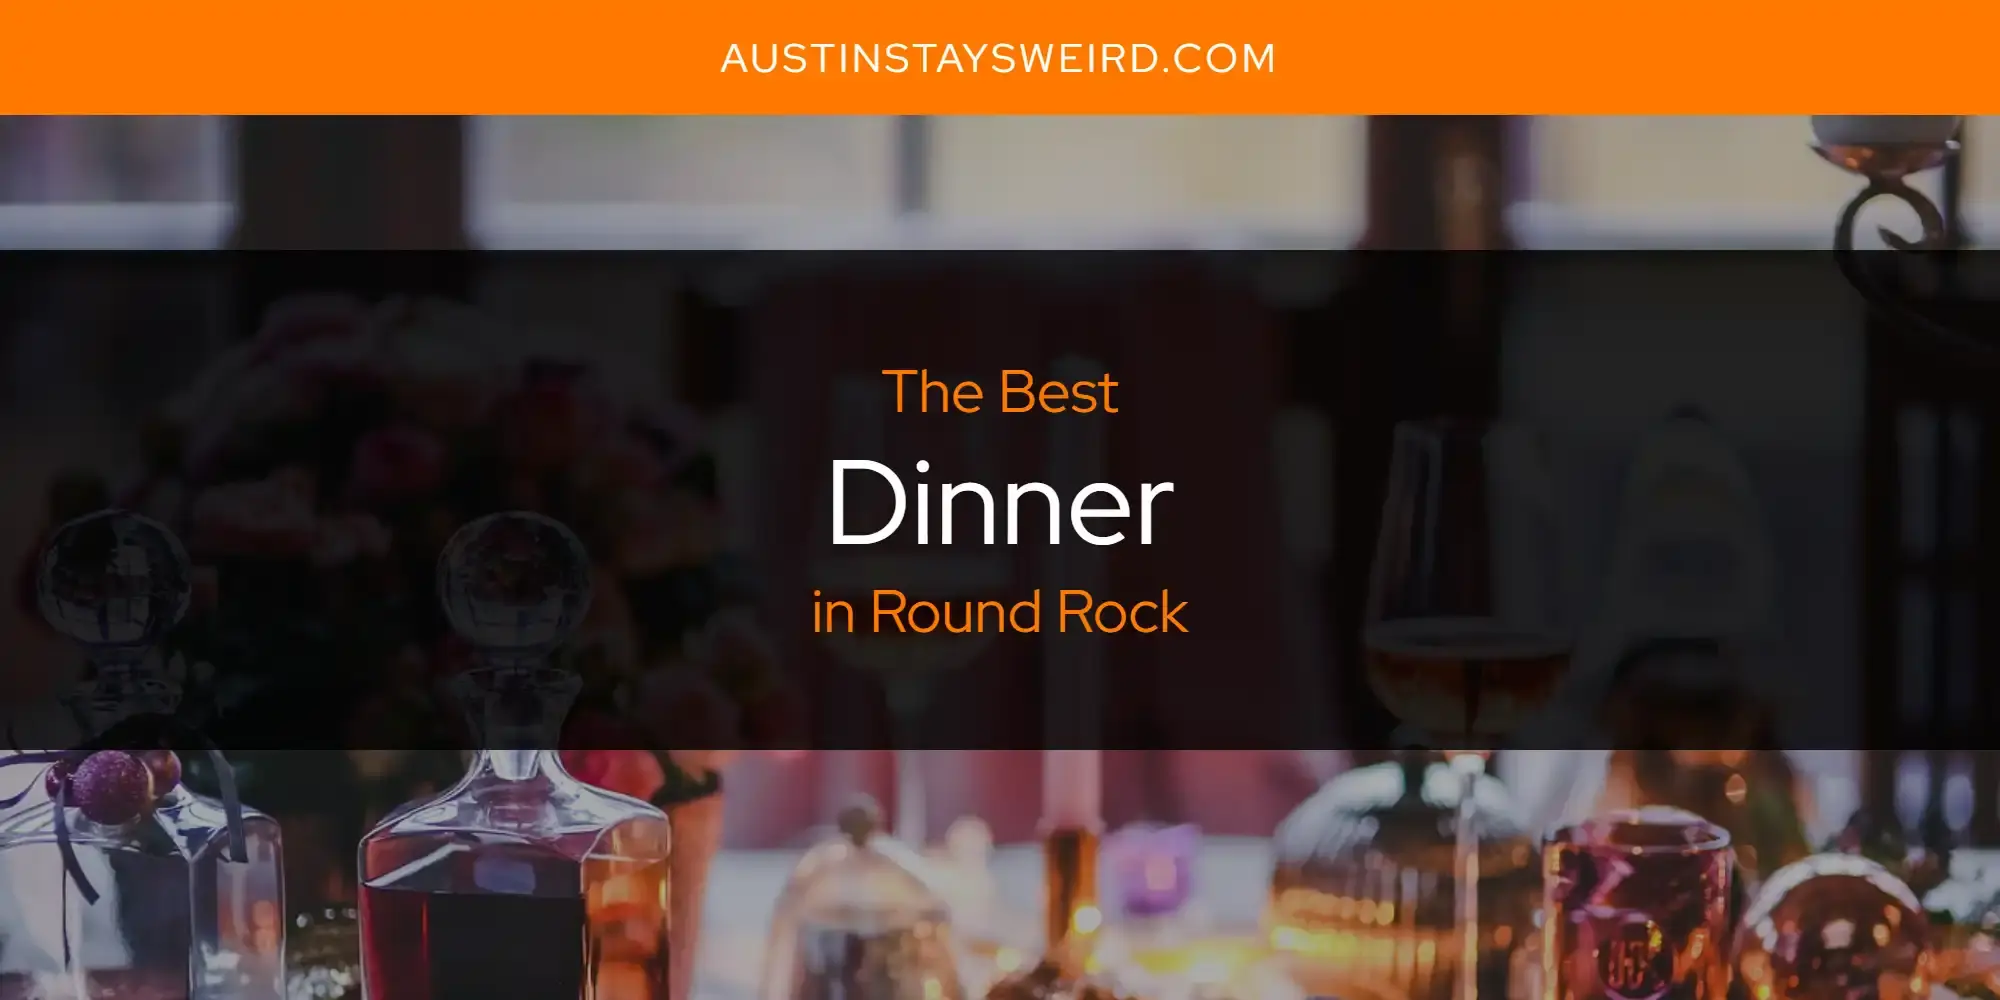 Best Dinner in Round Rock? Here's the Top 8